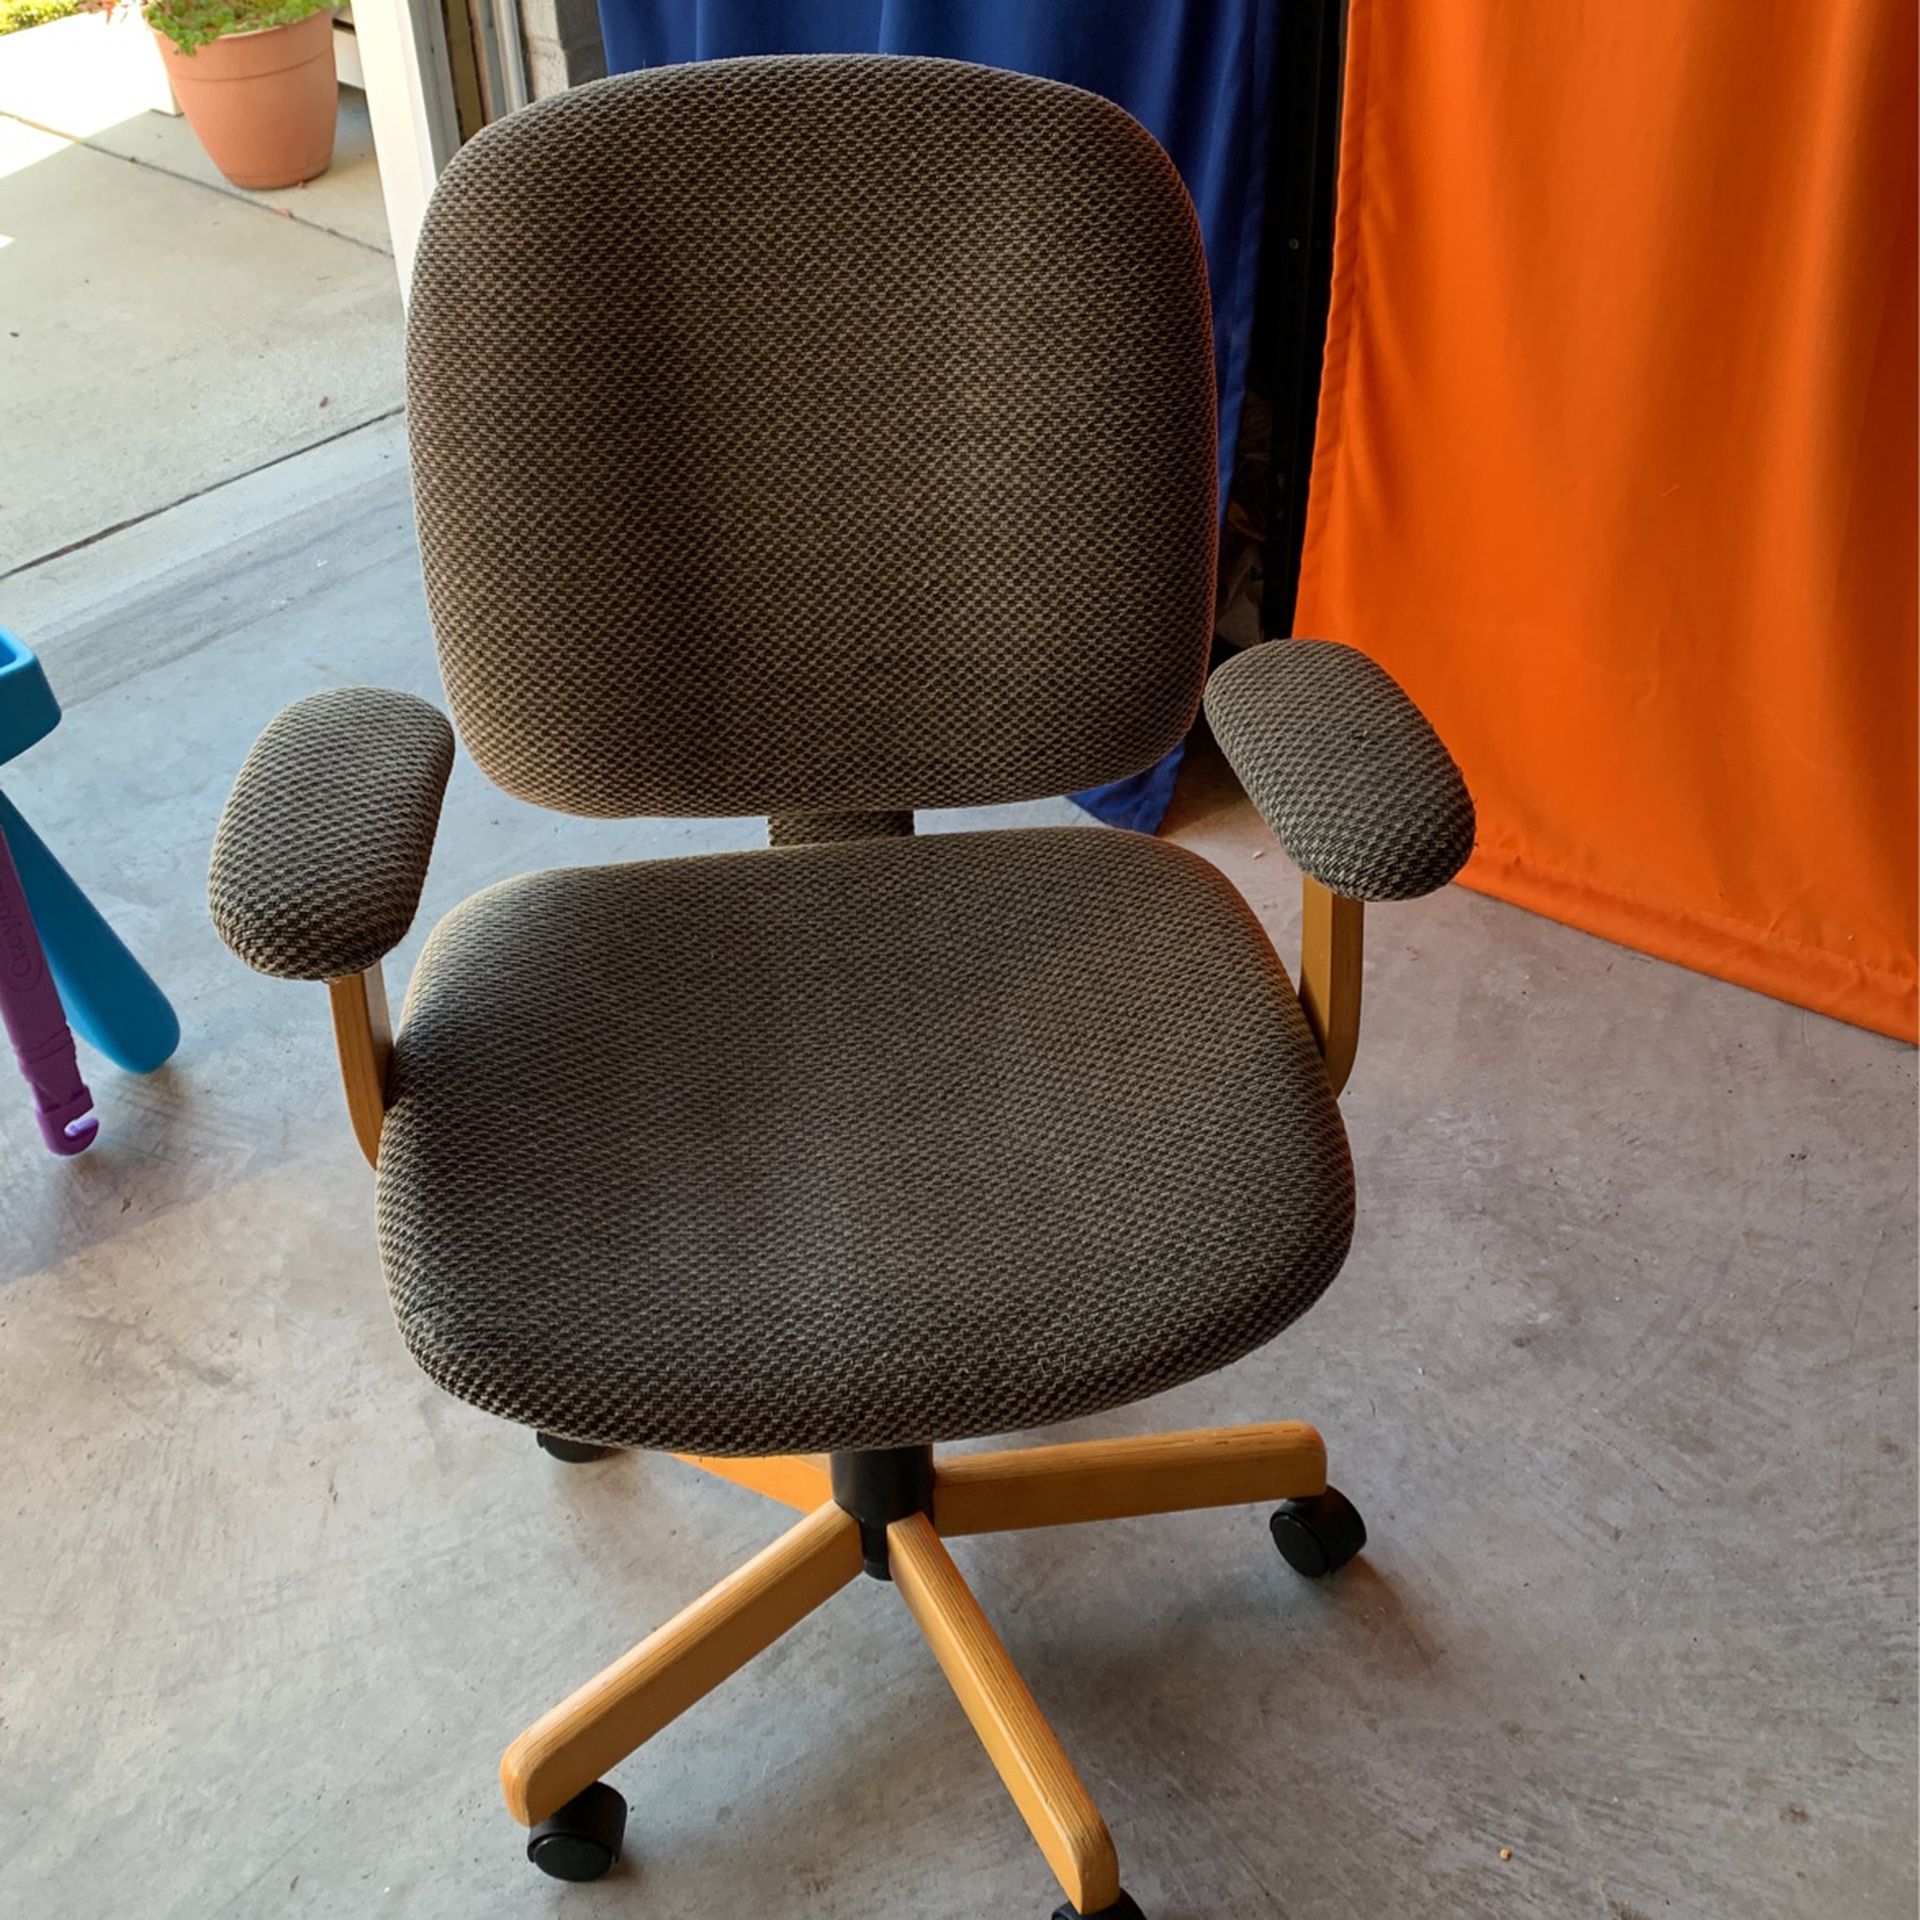 Office/Desk Chair - Adjustable Height